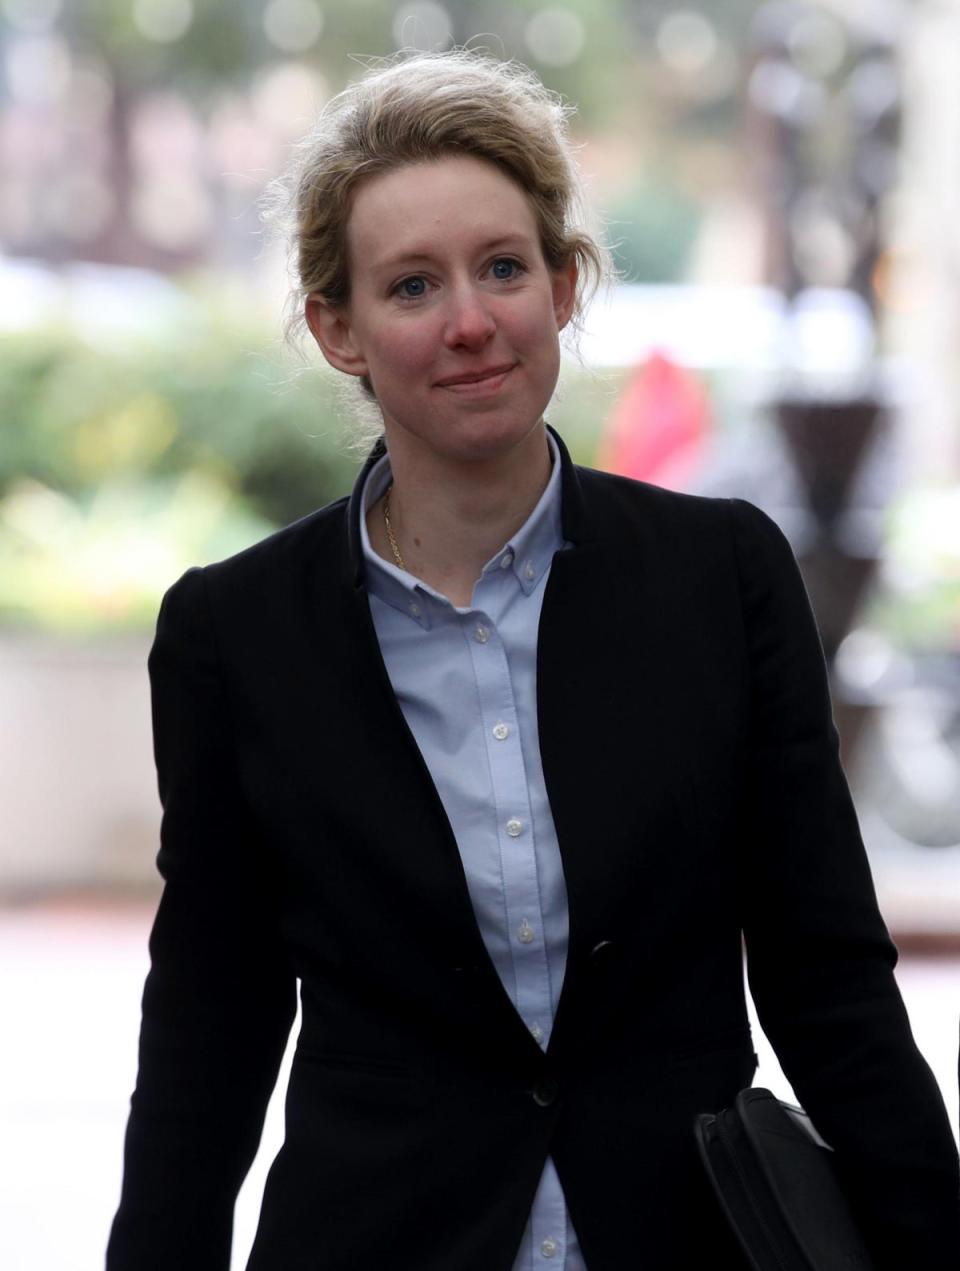 Elizabeth Holmes arrives at the Robert F Peckham federal court in January 2019 (Justin Sullivan / Getty Images)